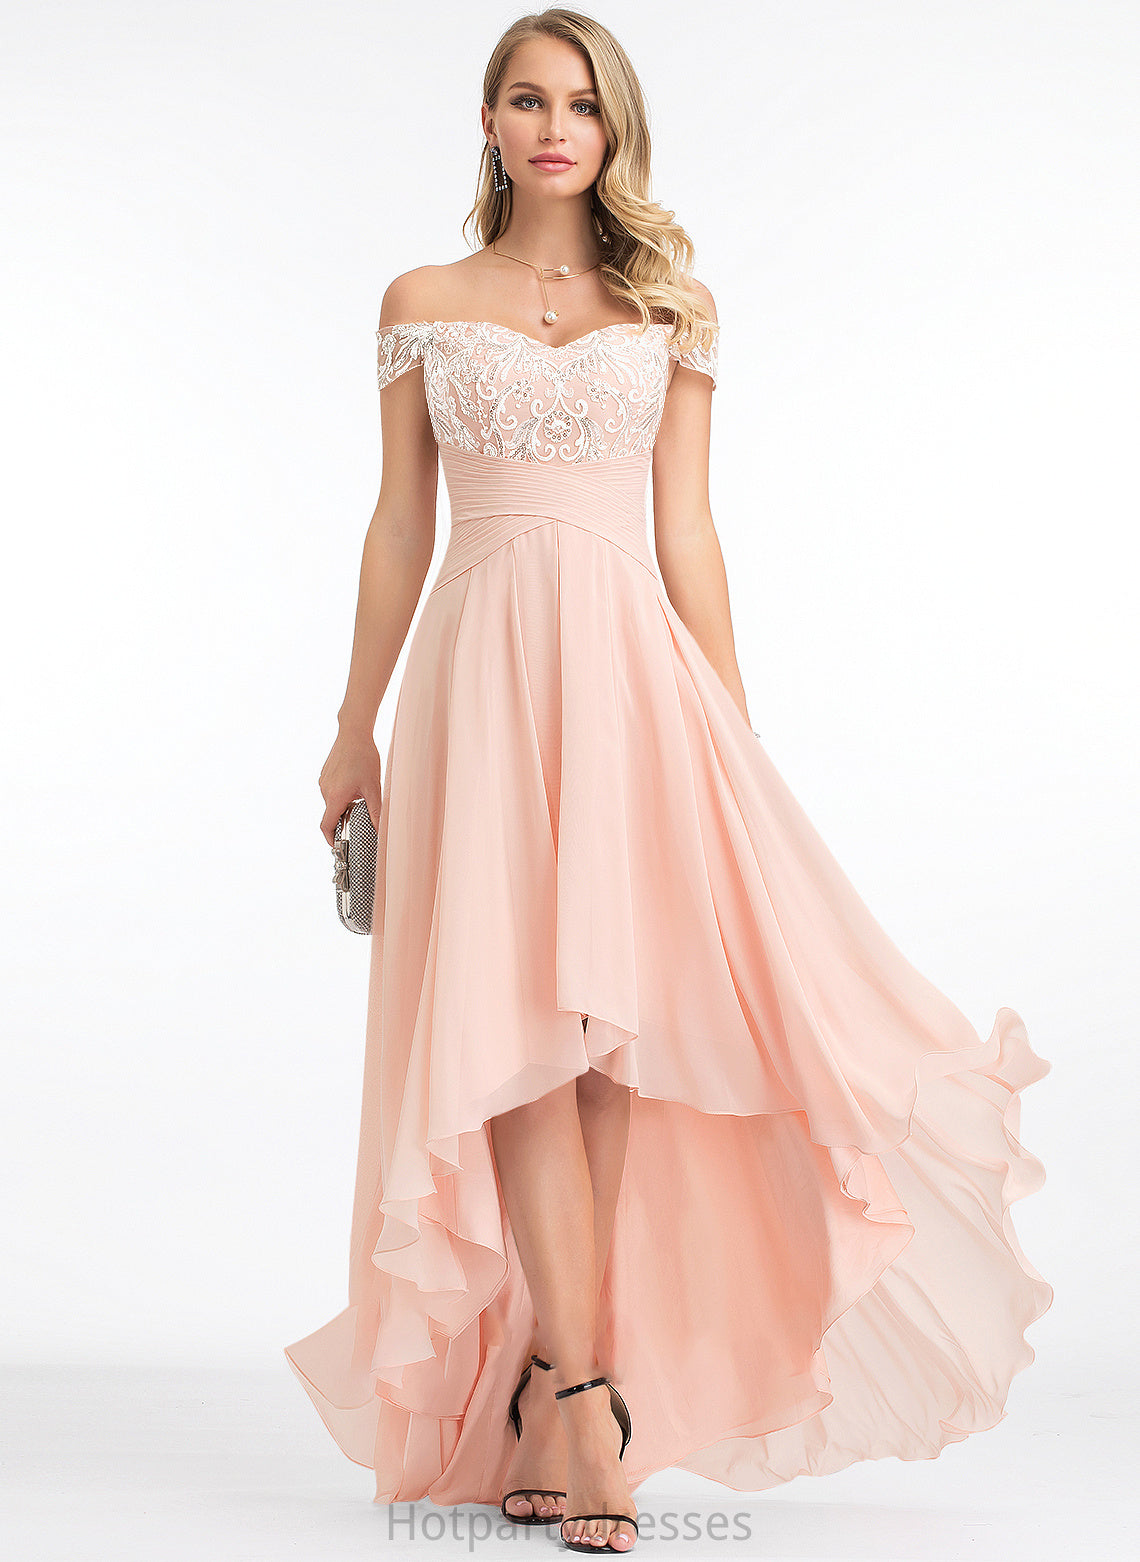 Beatrice Off-the-Shoulder Asymmetrical Dress Sequins Wedding Dresses With A-Line Wedding Chiffon